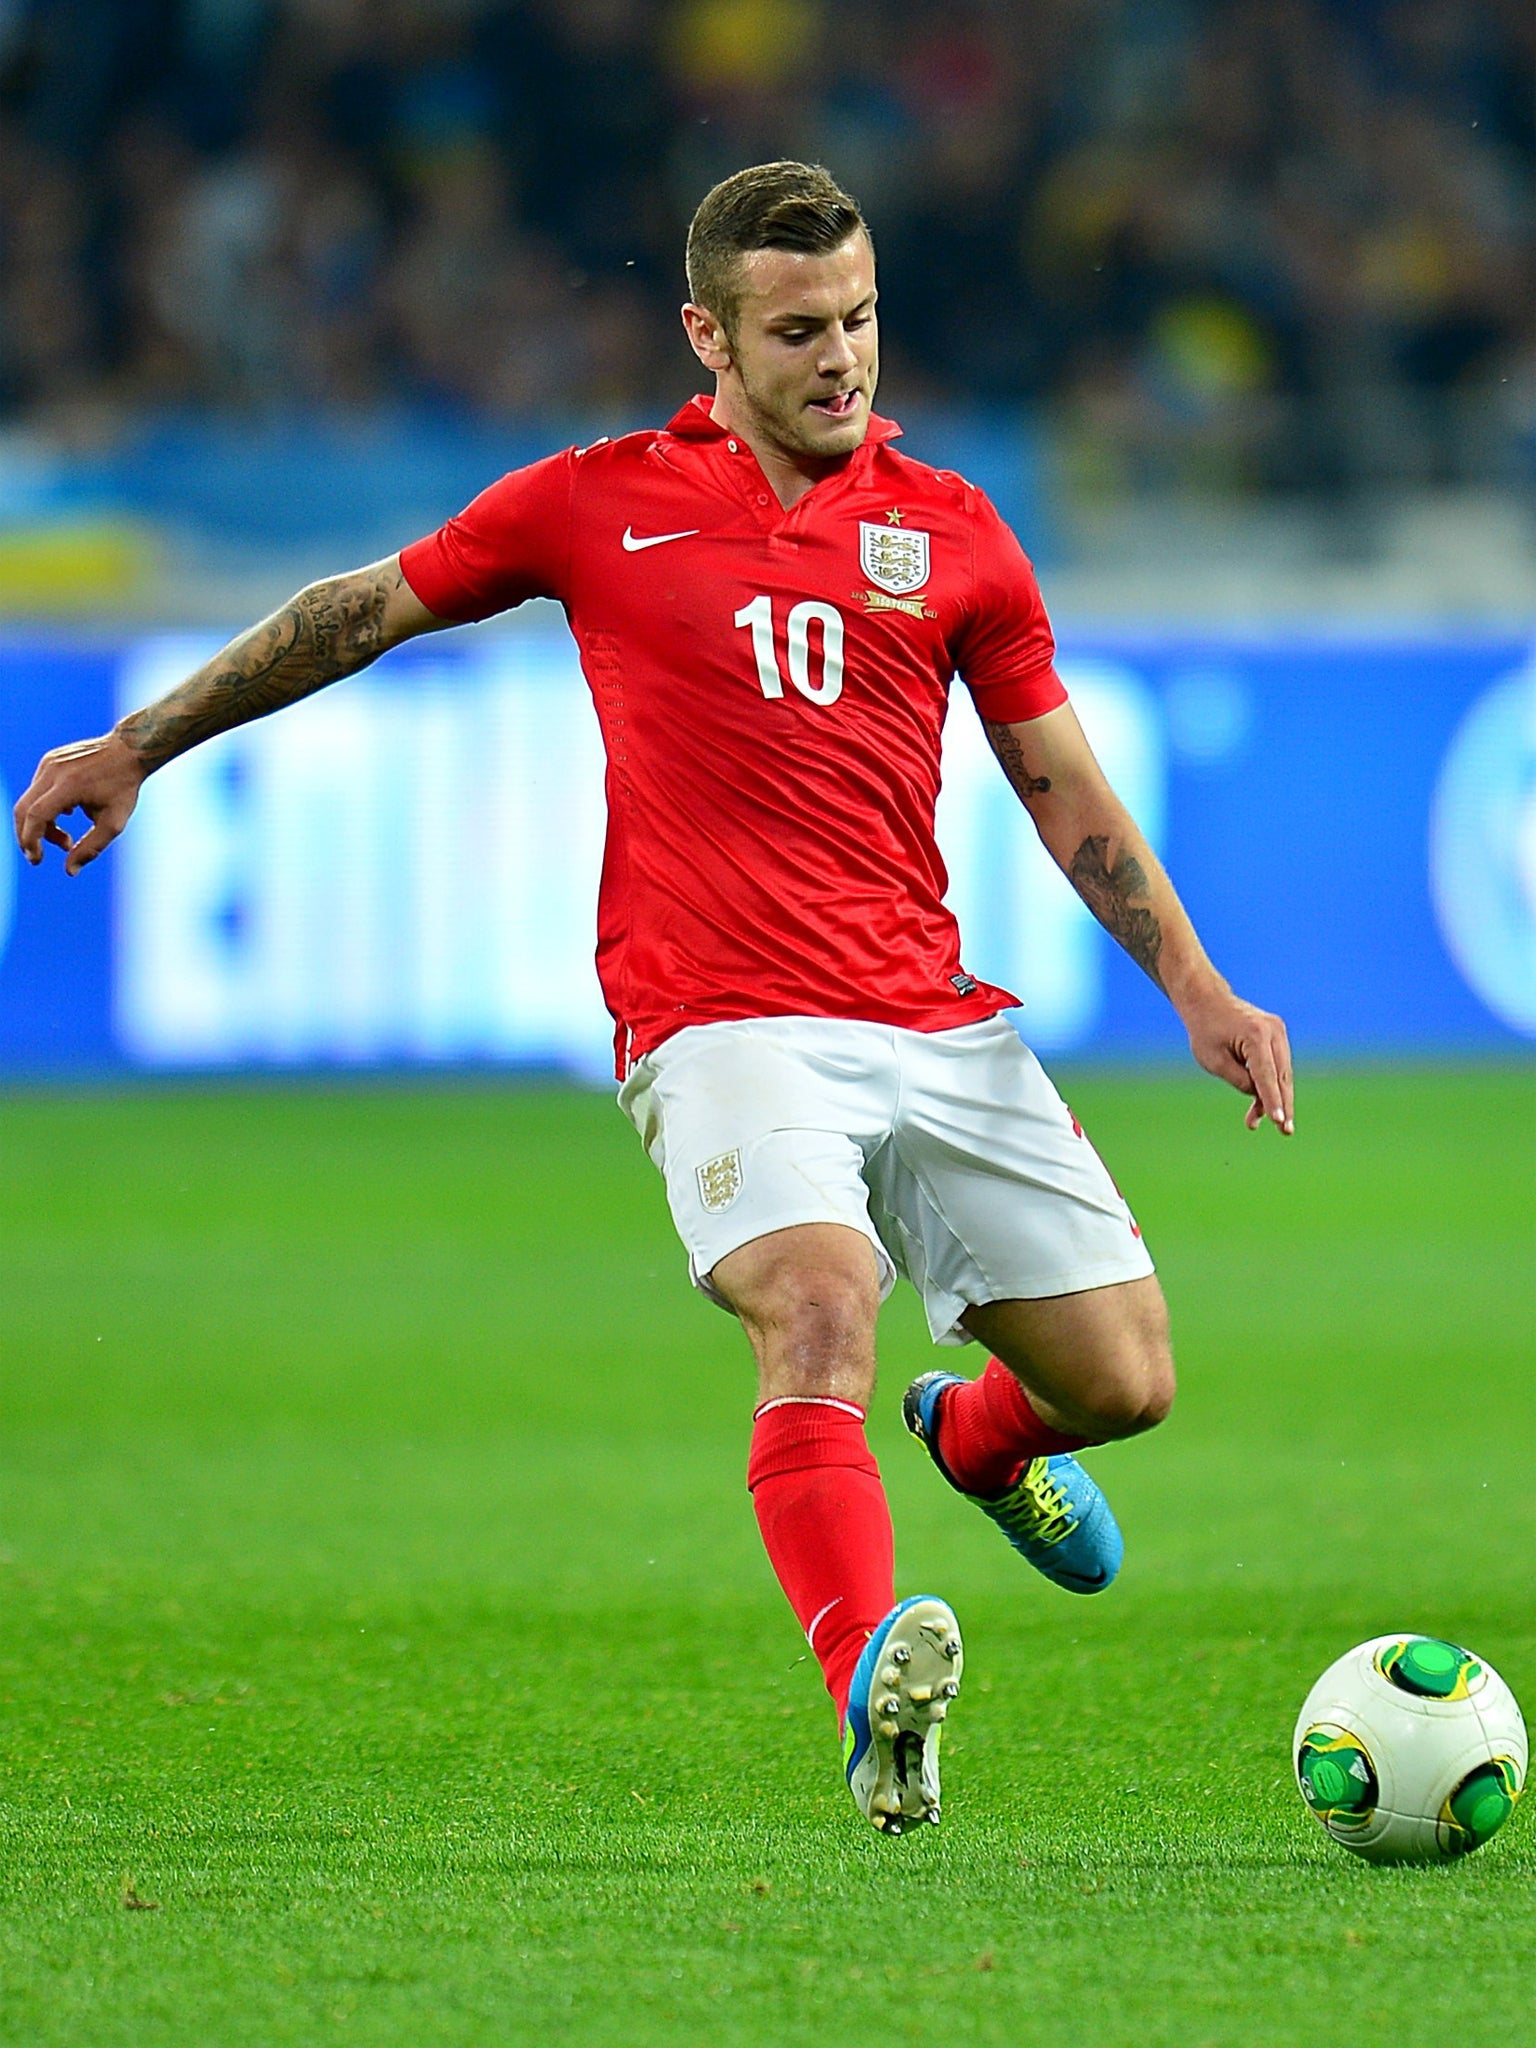 Jack Wilshere struggled and does not look ready to play at this level